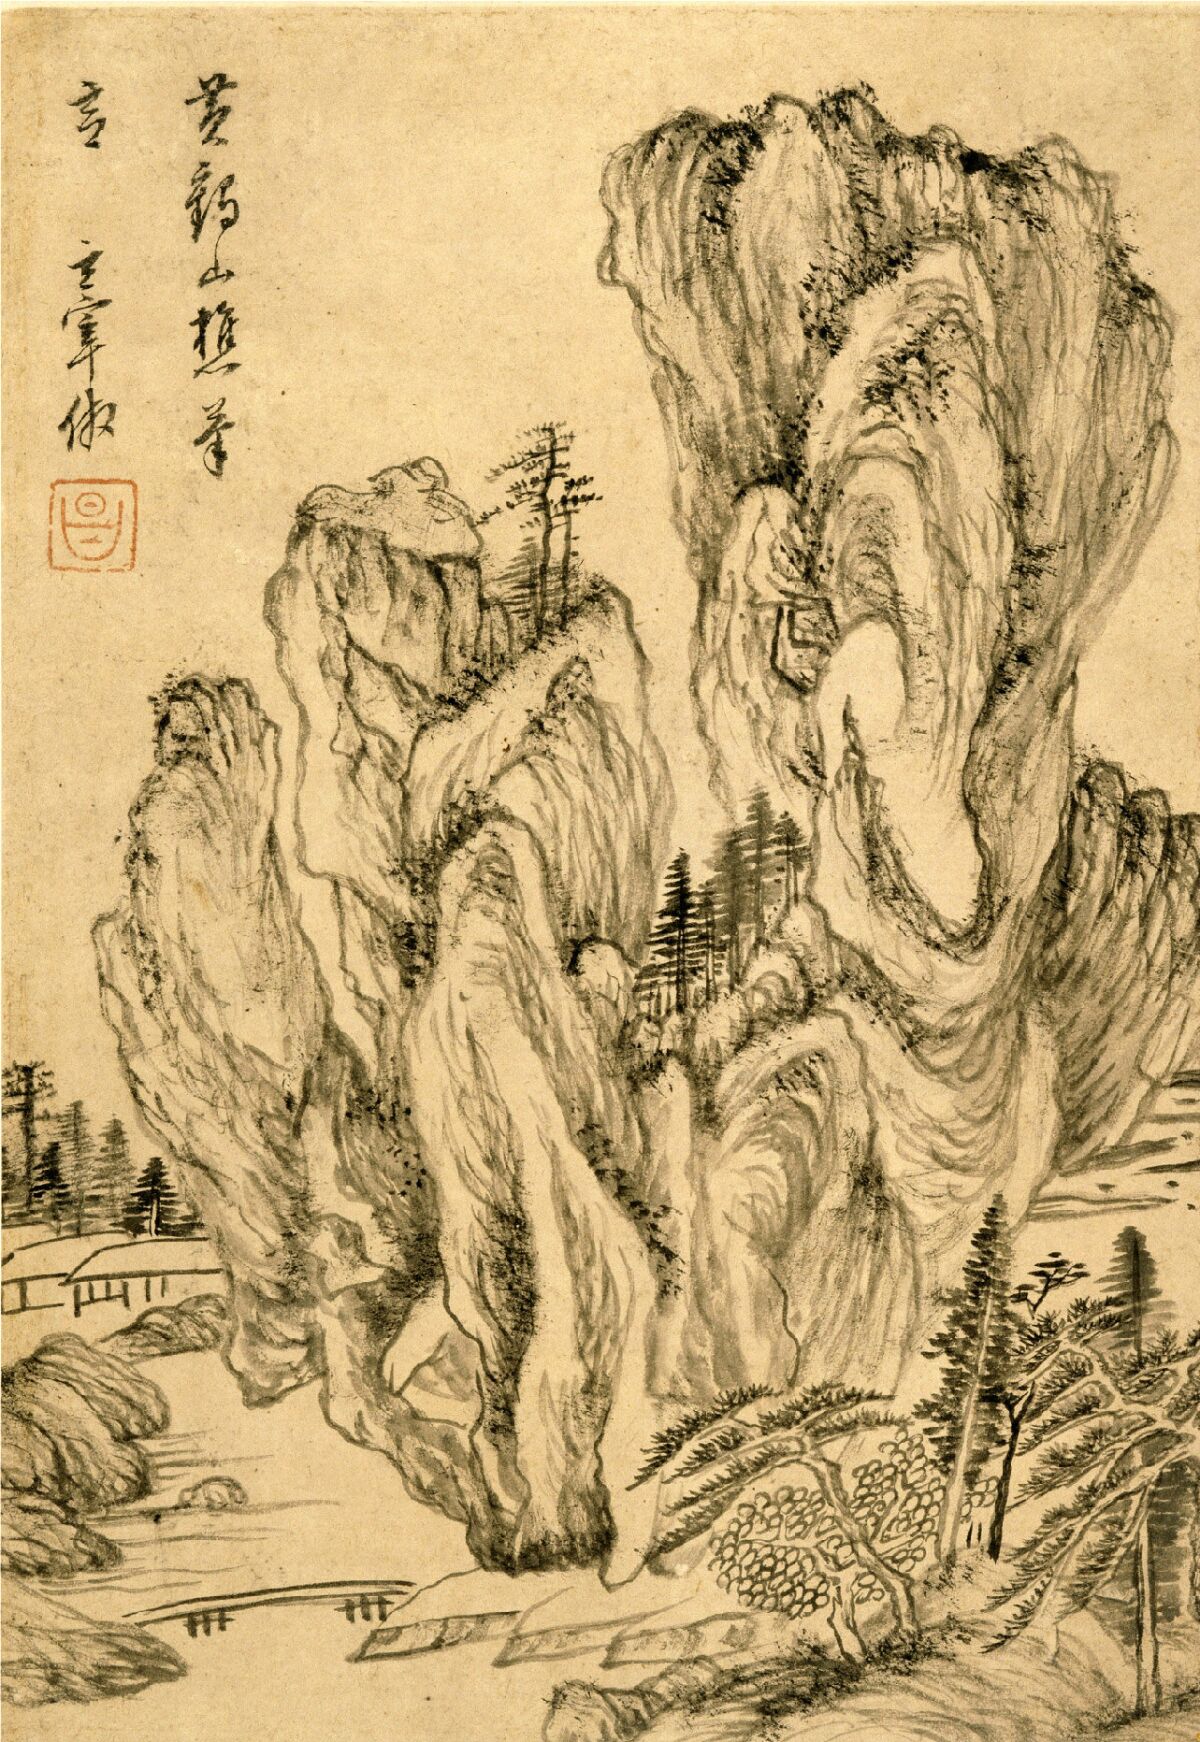 Dong Qichang, "Landscape in the Style of Wang Meng (circa 1308-1385)," circa 1620s-1630s, ink on paper (LACMA)